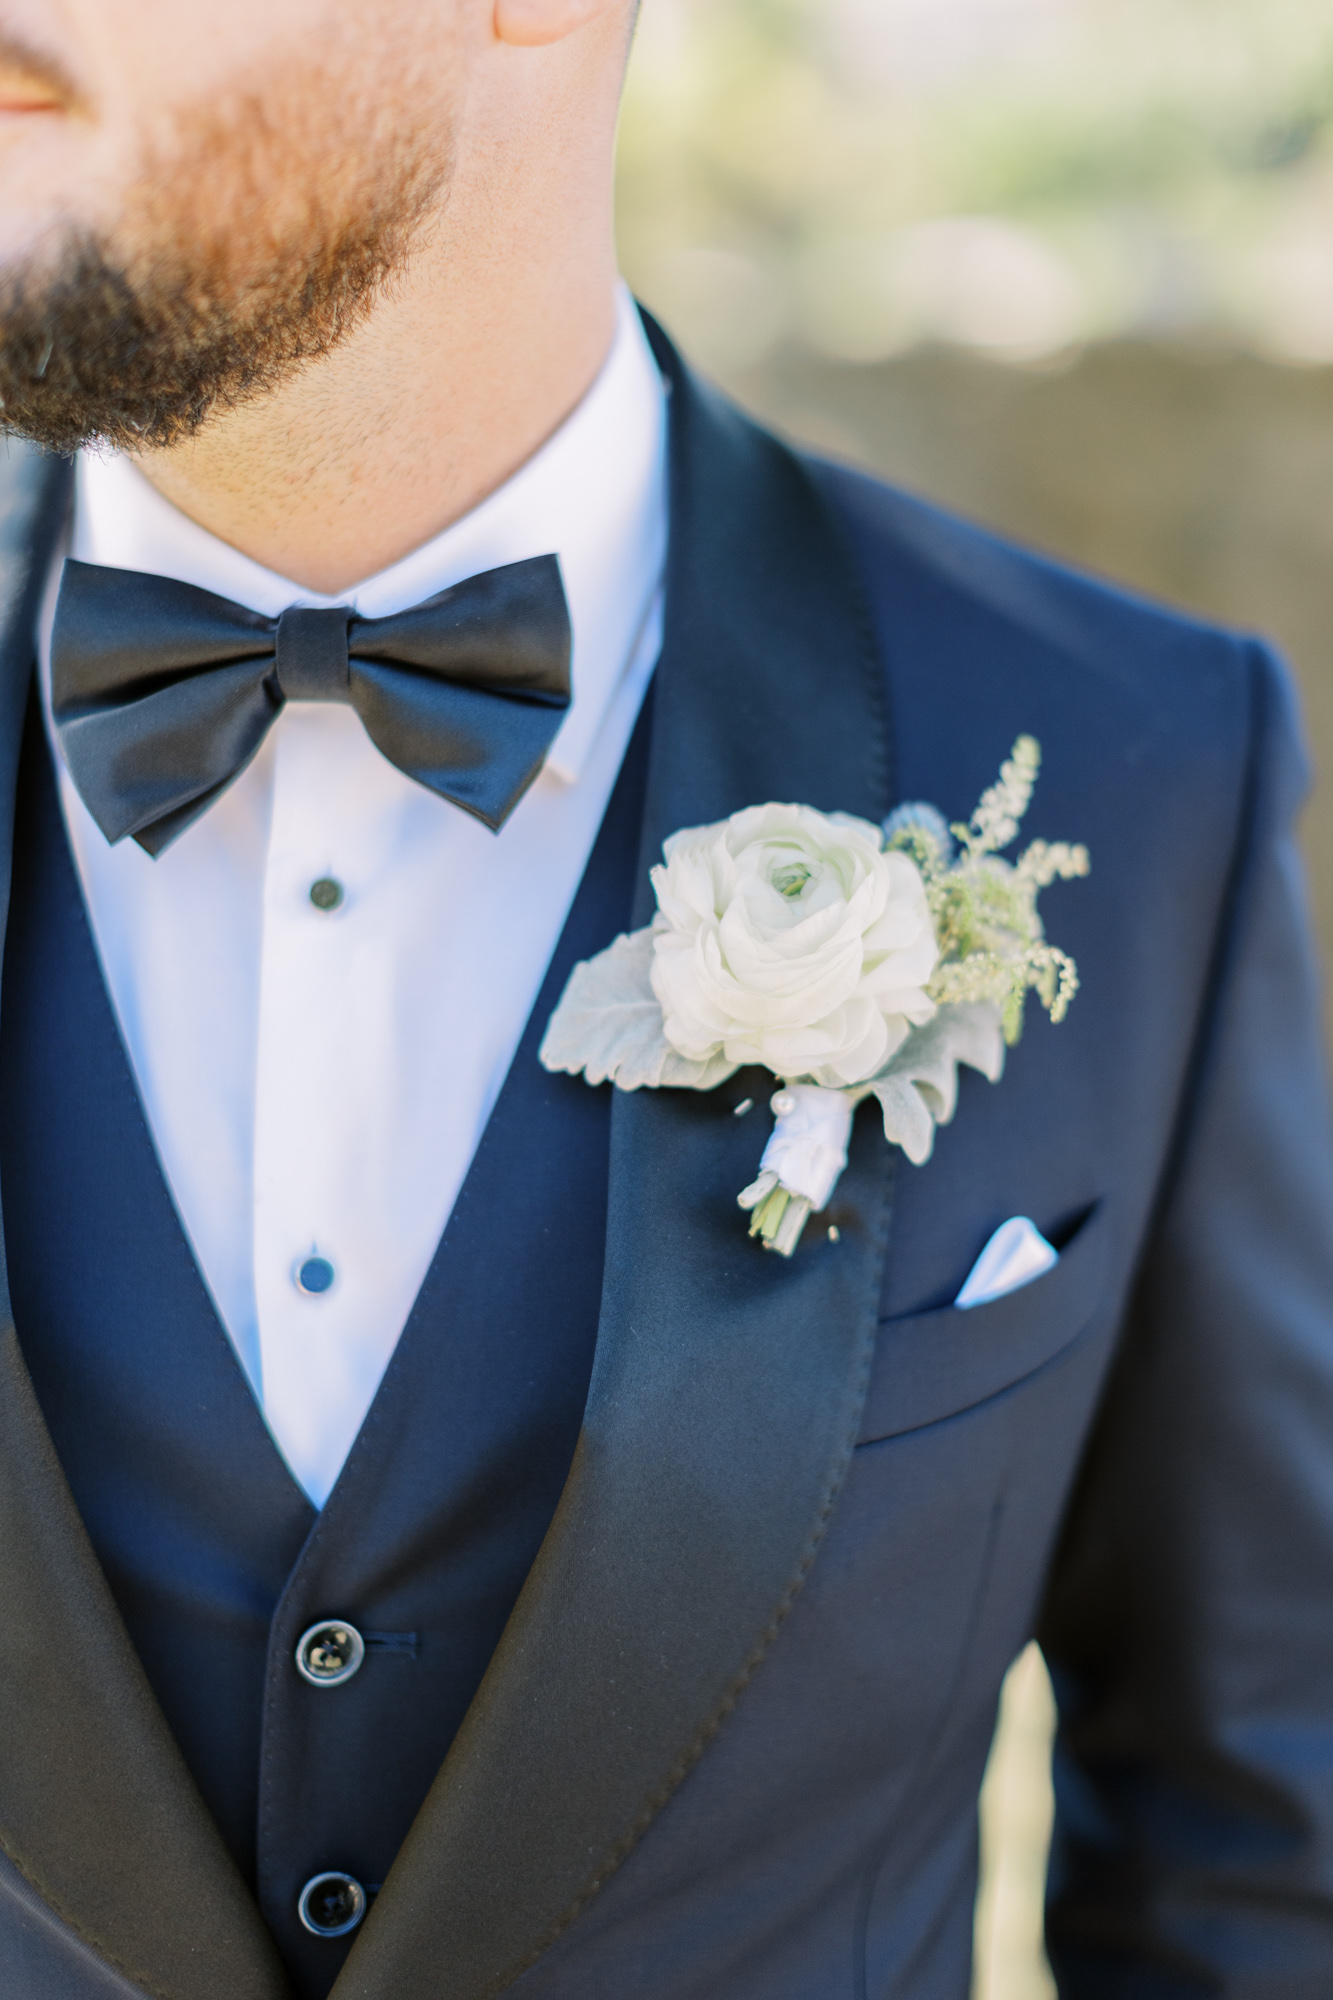 Detail photo of grooms boutonniere and bowtie taken by Toronto wedding photographer Paula VISCO photography